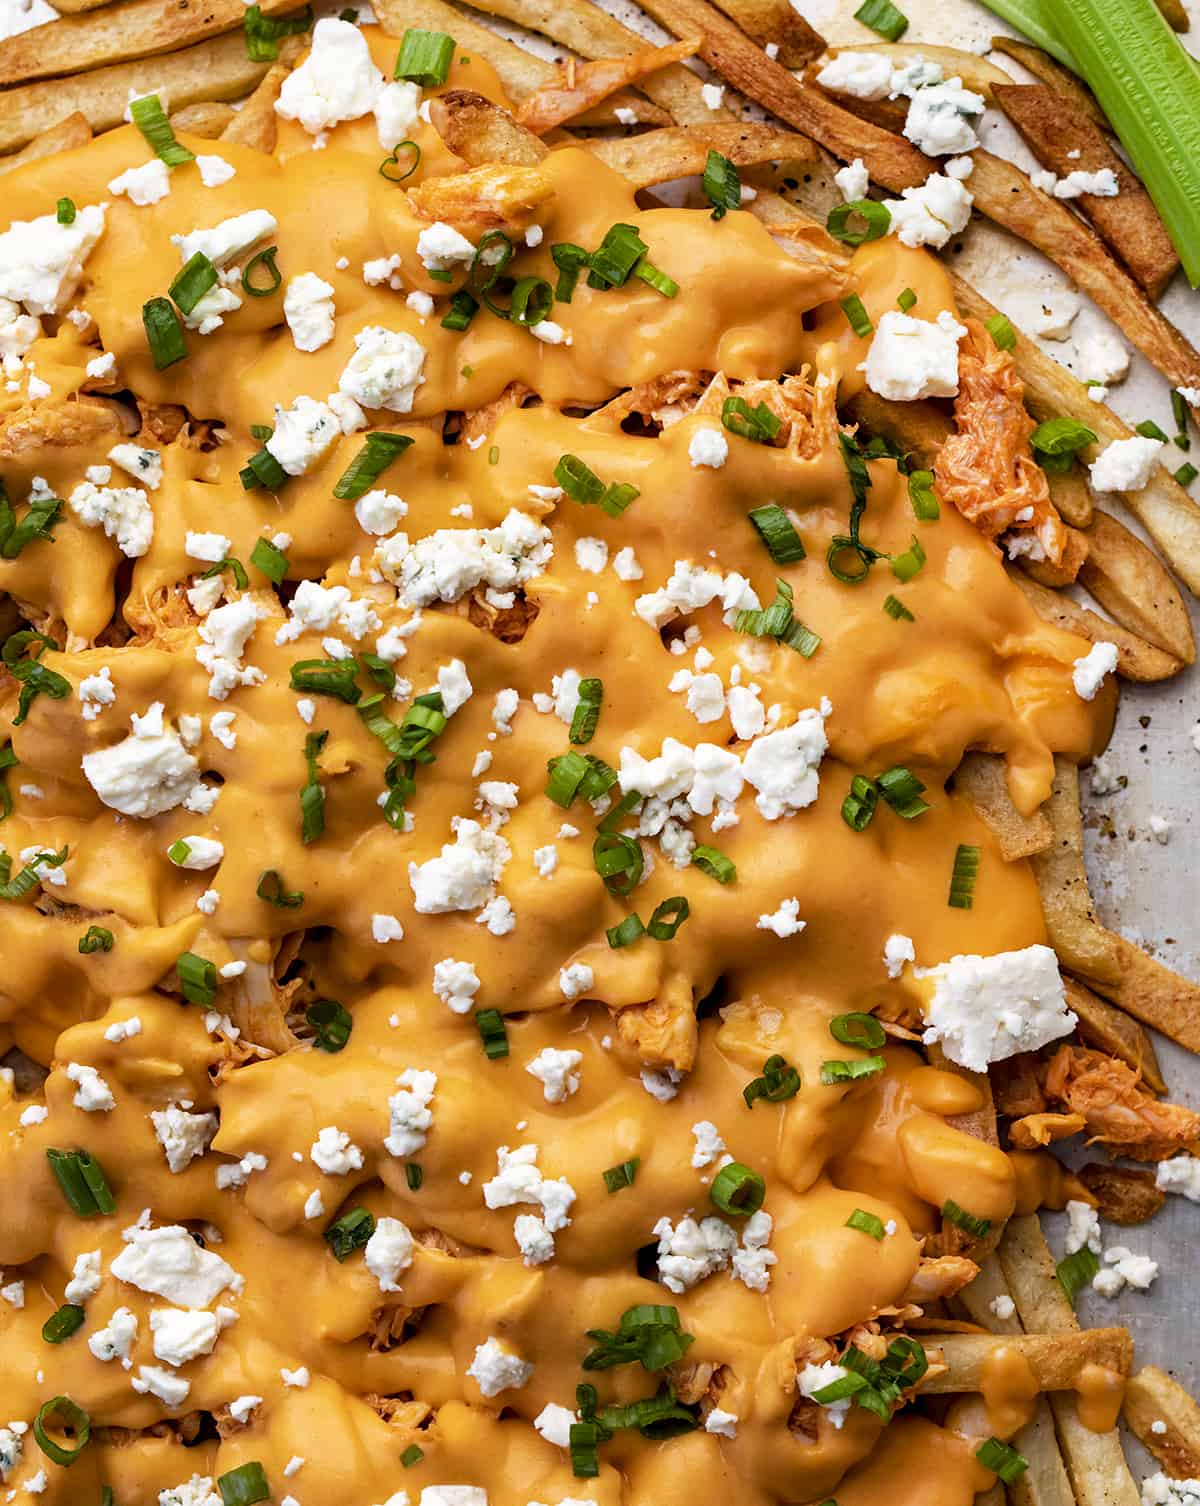 Buffalo Chicken Cheesy Fries on a Sheet Pan with Green Onion and Blue Cheese. Appetizer, Super Bowl Food, Football Recipes, Cheesy Fries, Buffalo Chicken Recipes, Buffalo Chicken Sauce, i am homesteader, iamhomesteader